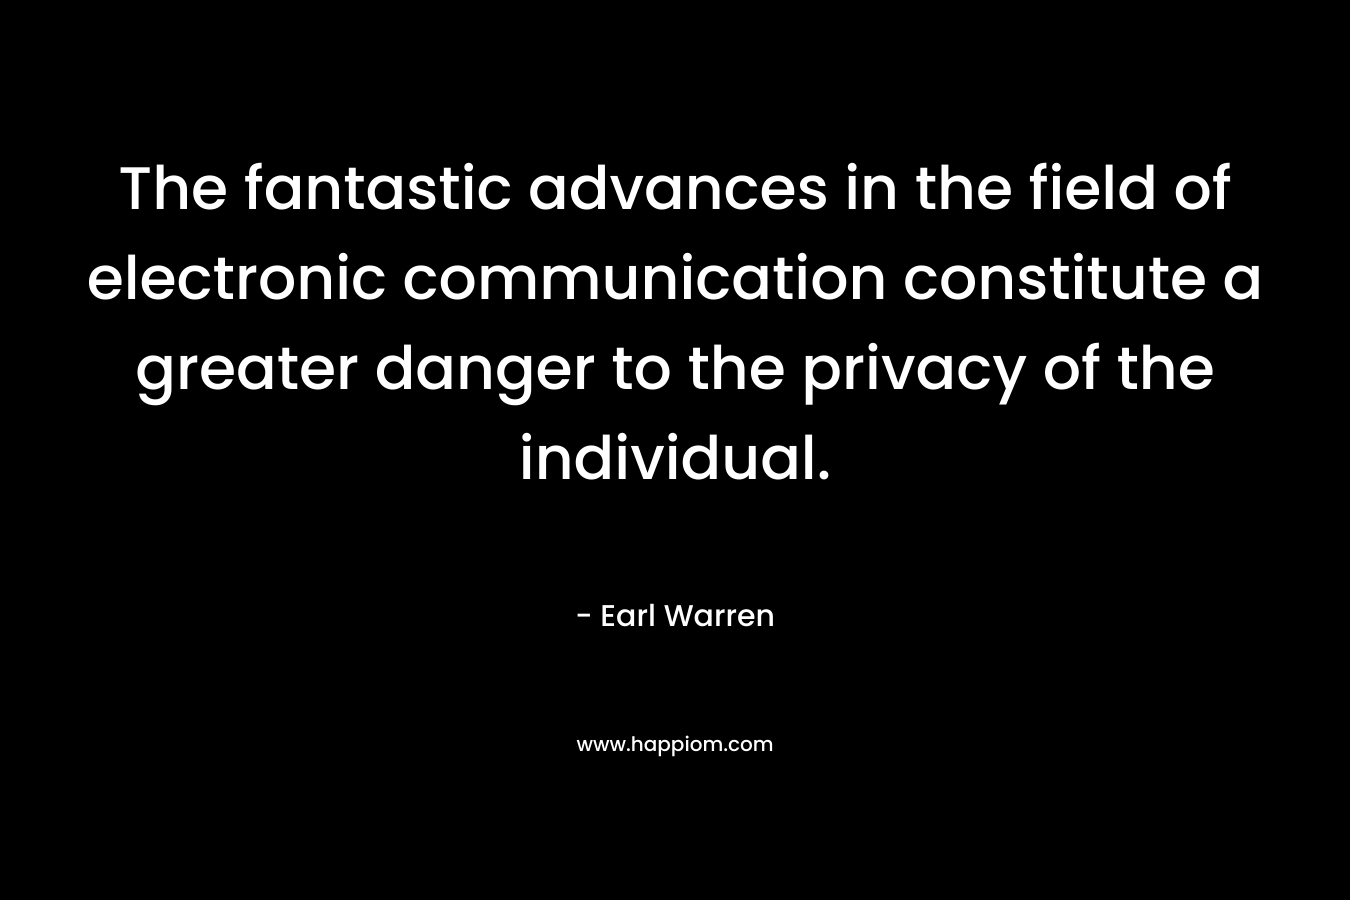 The fantastic advances in the field of electronic communication constitute a greater danger to the privacy of the individual.